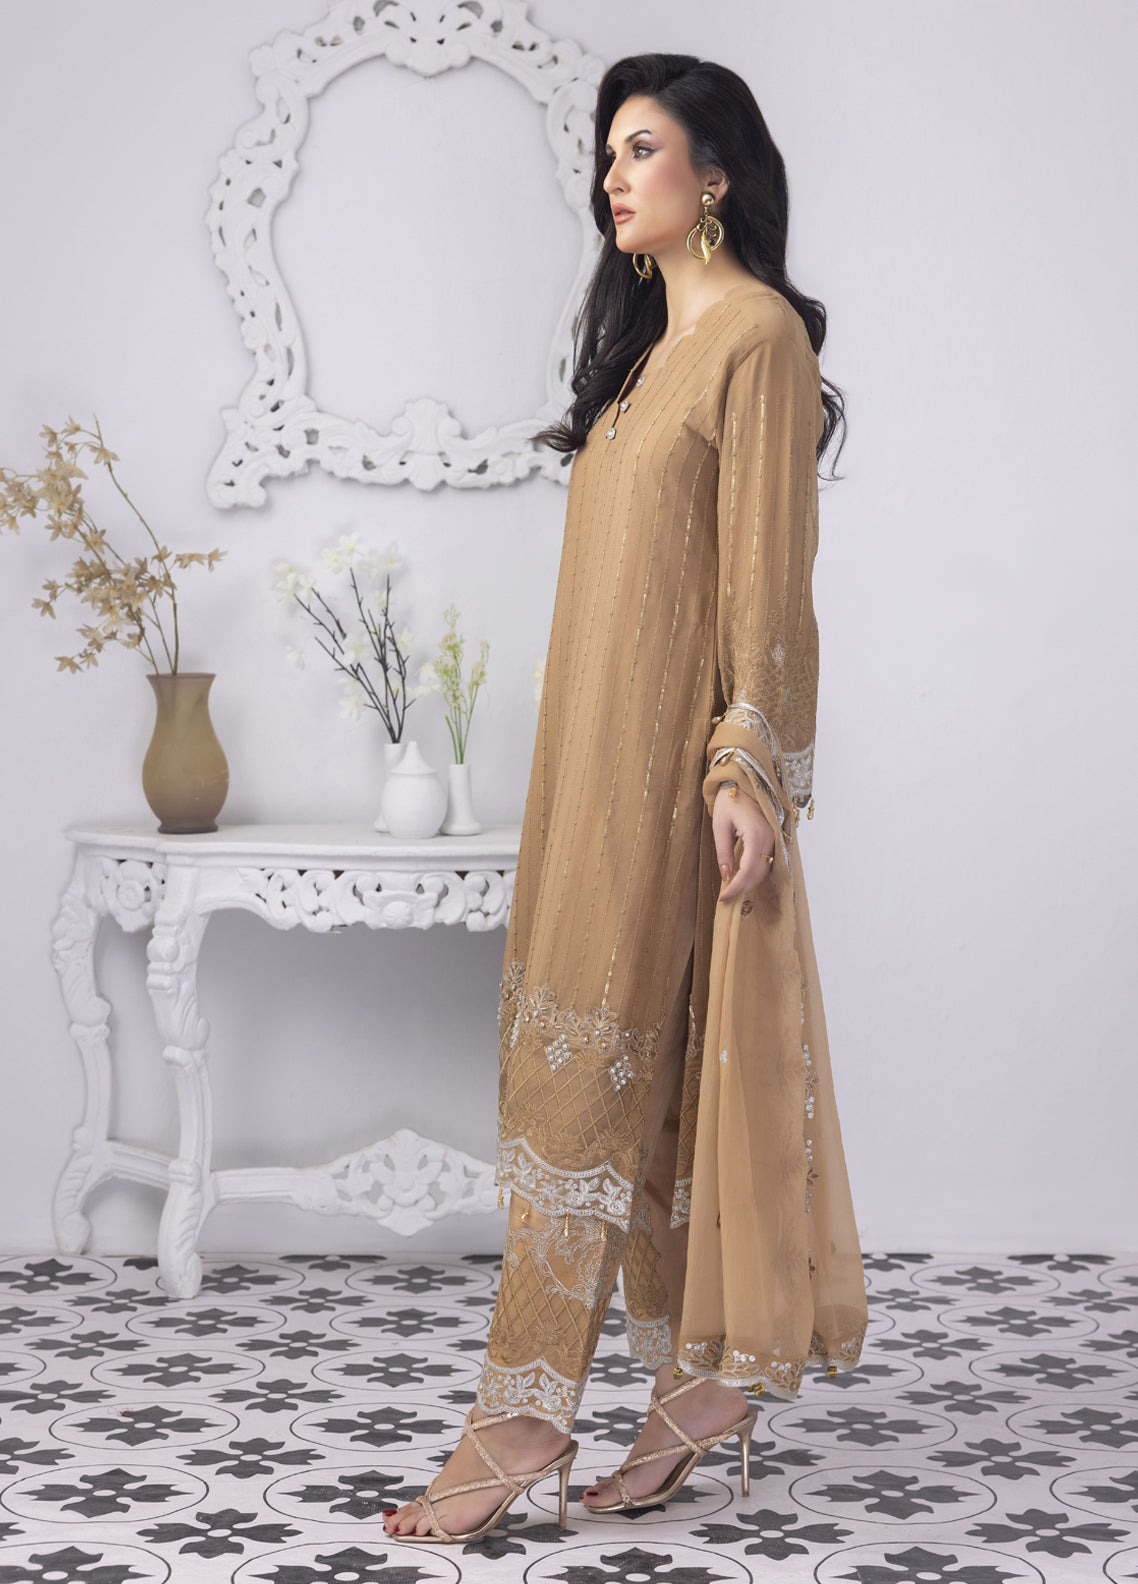 Mansoob By Polawn Embroidered Stitched 3 Piece Chiffon Suit PD-23-103 Ready to Wear